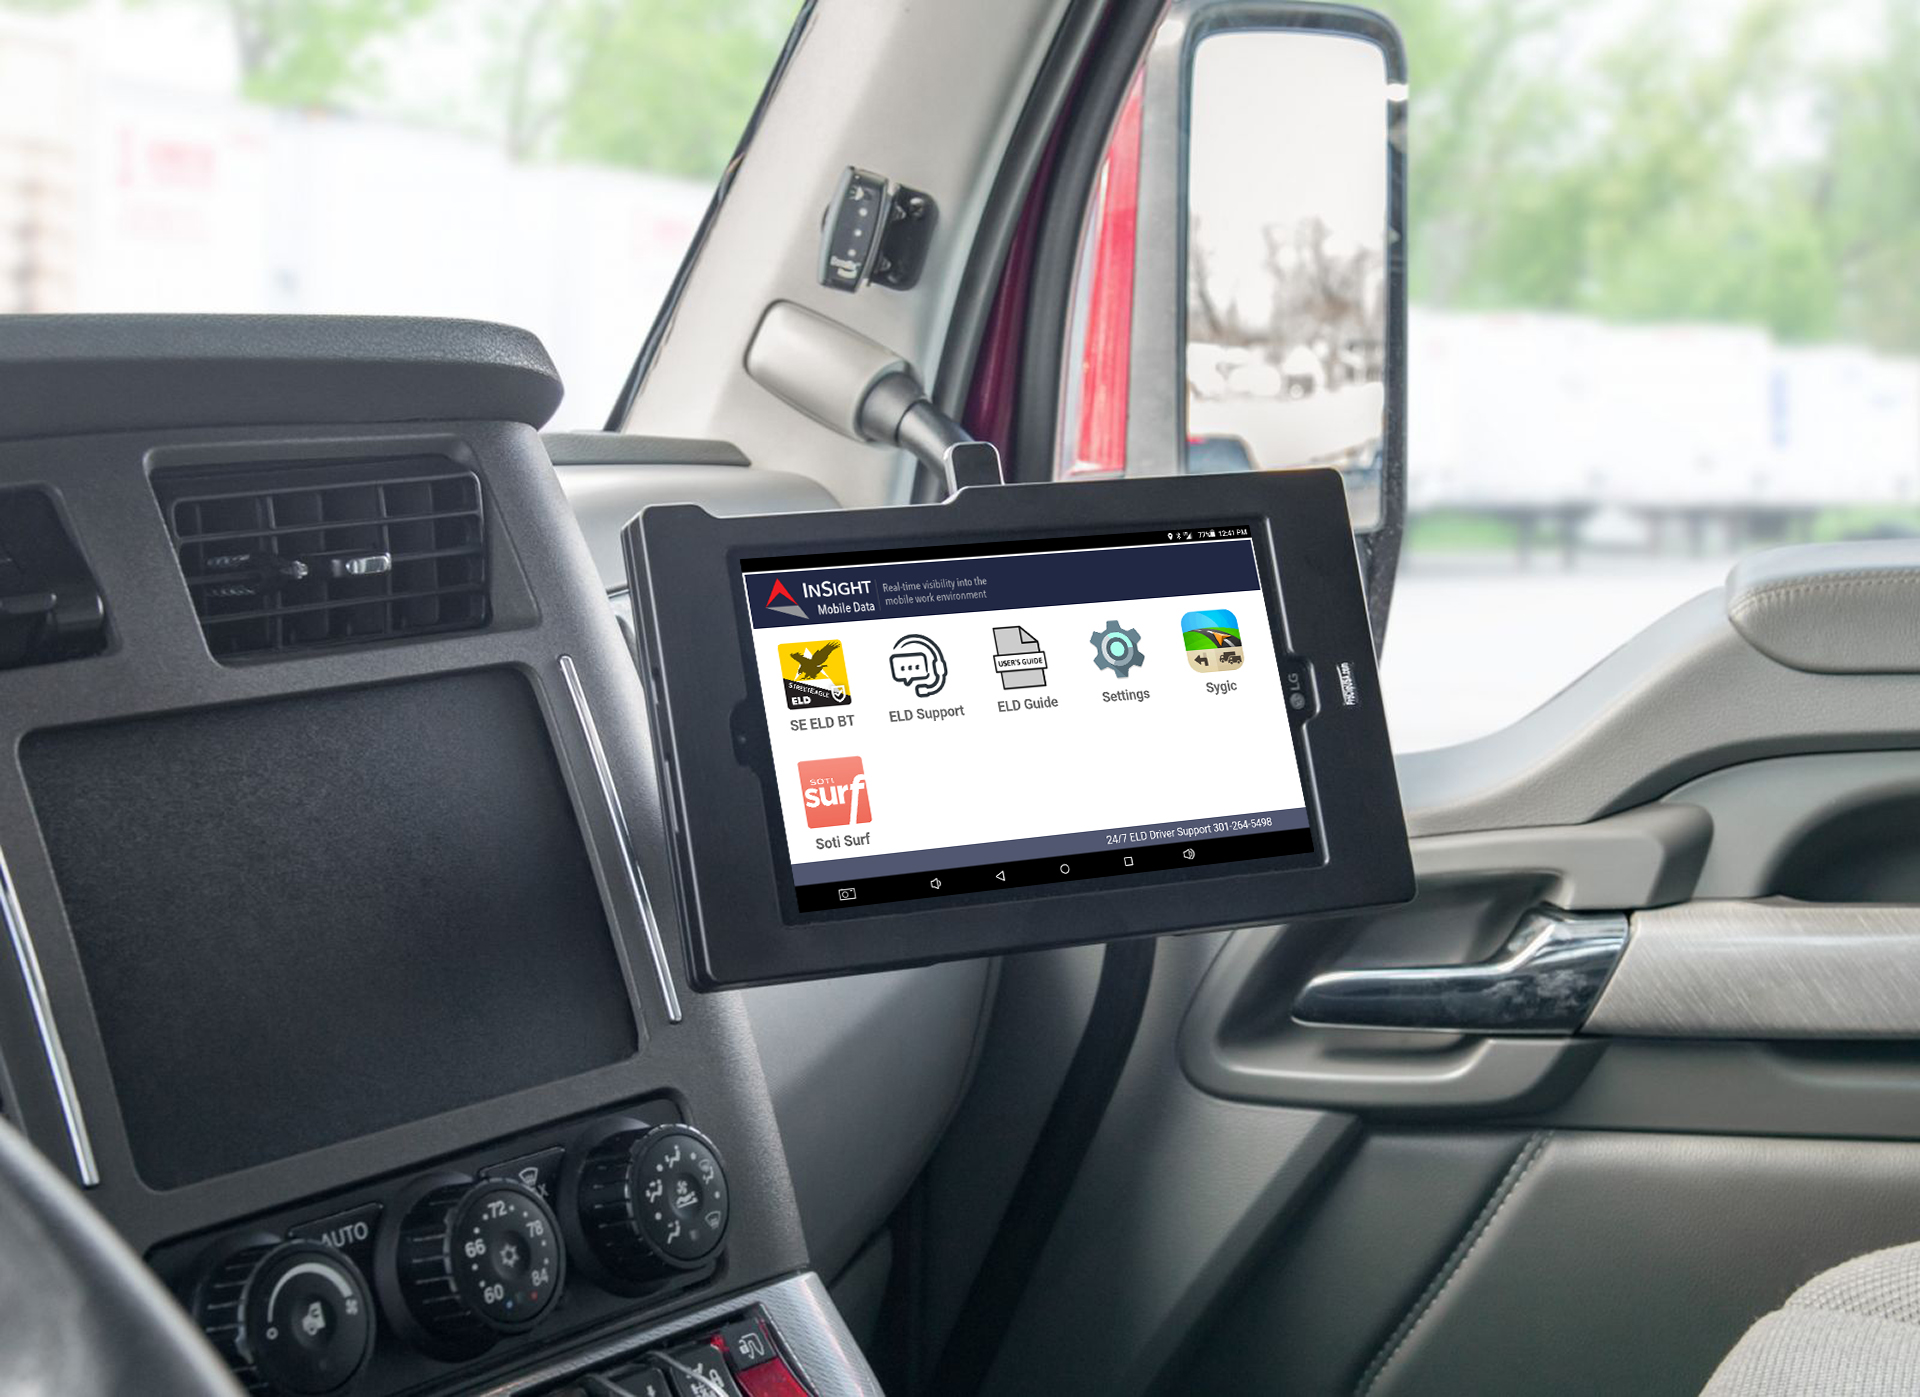 ELD only ruggedized tablet for compliance